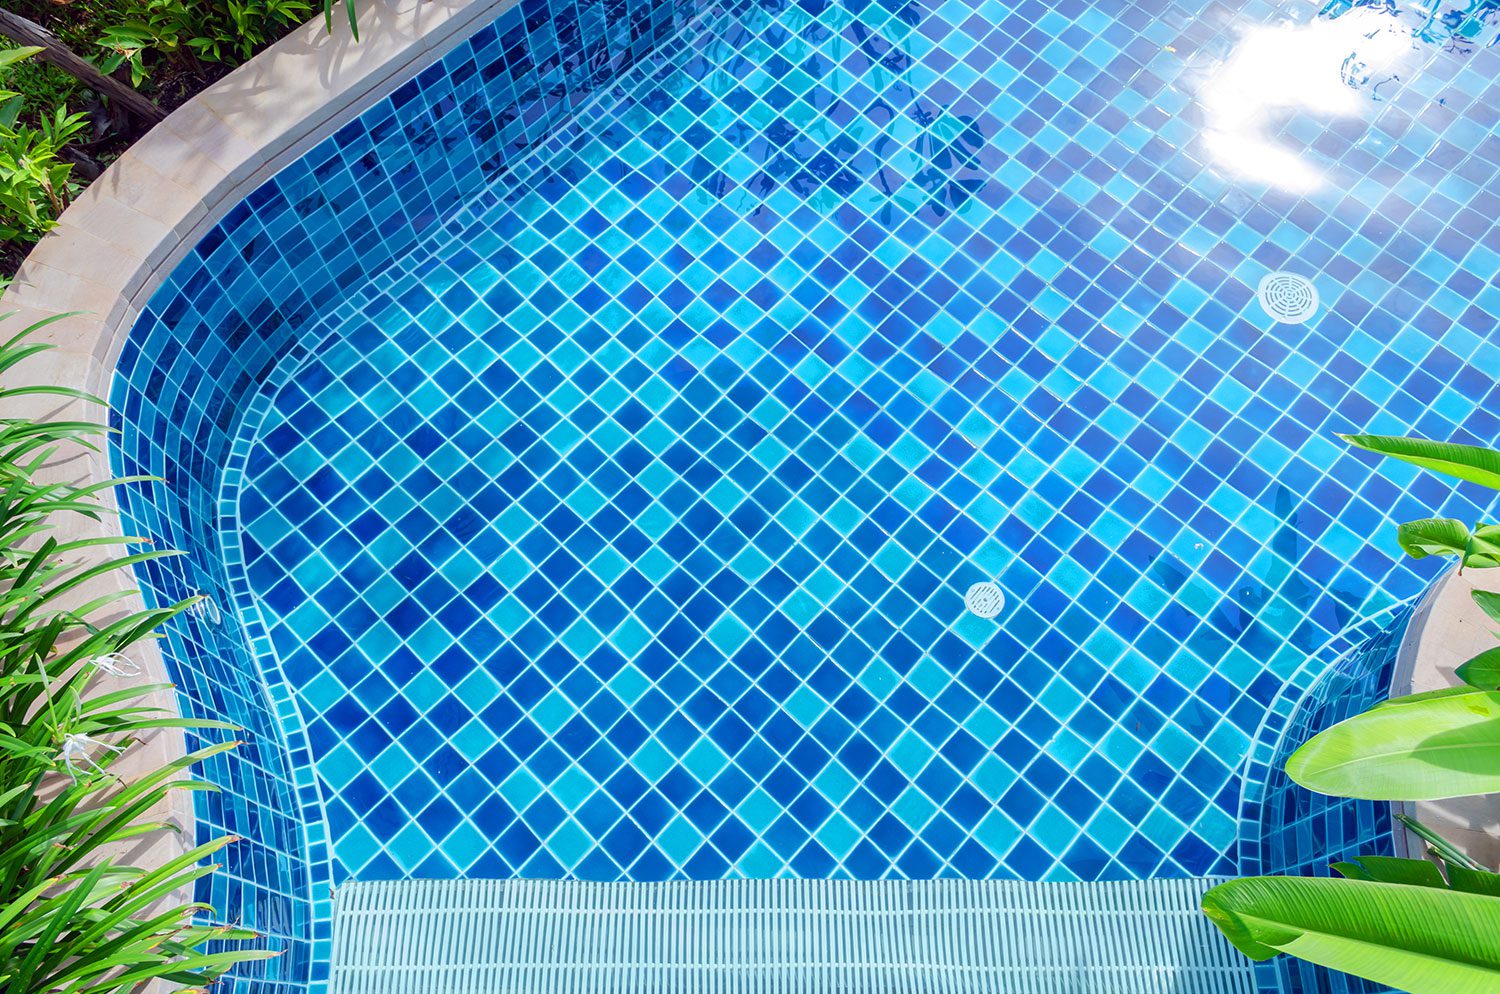 A closeup look of a pool with blue tiles